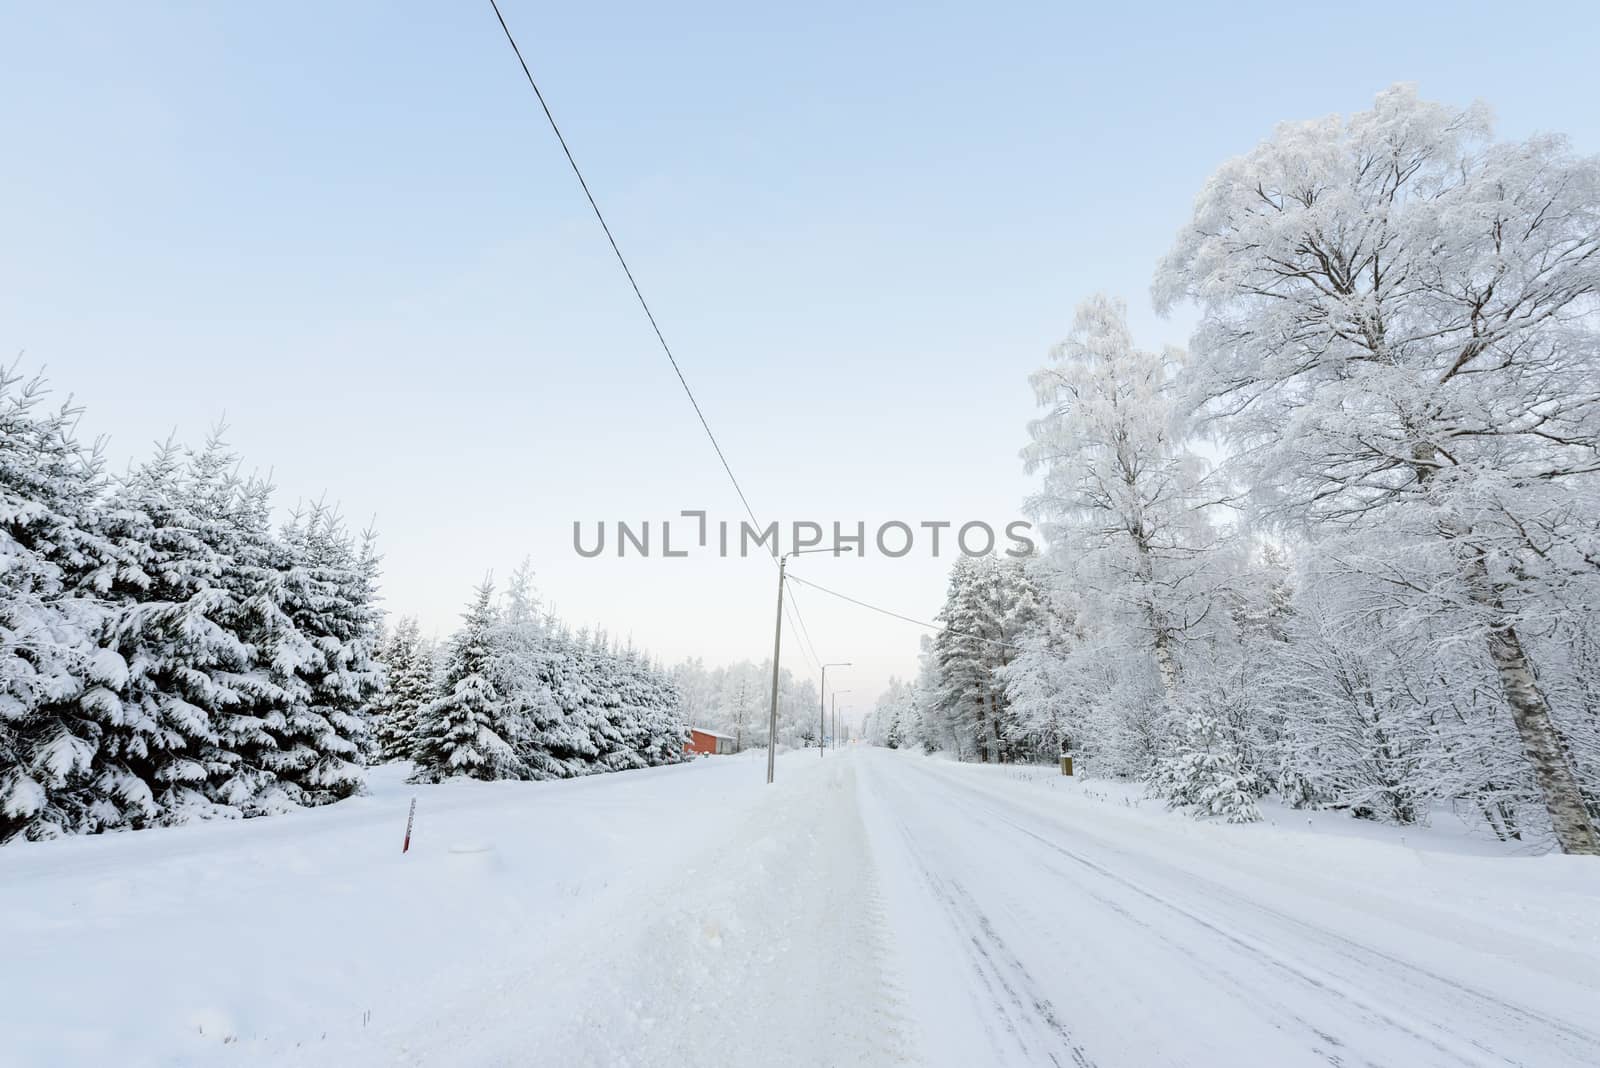 The road number 496  has covered with heavy snow in winter seaso by animagesdesign